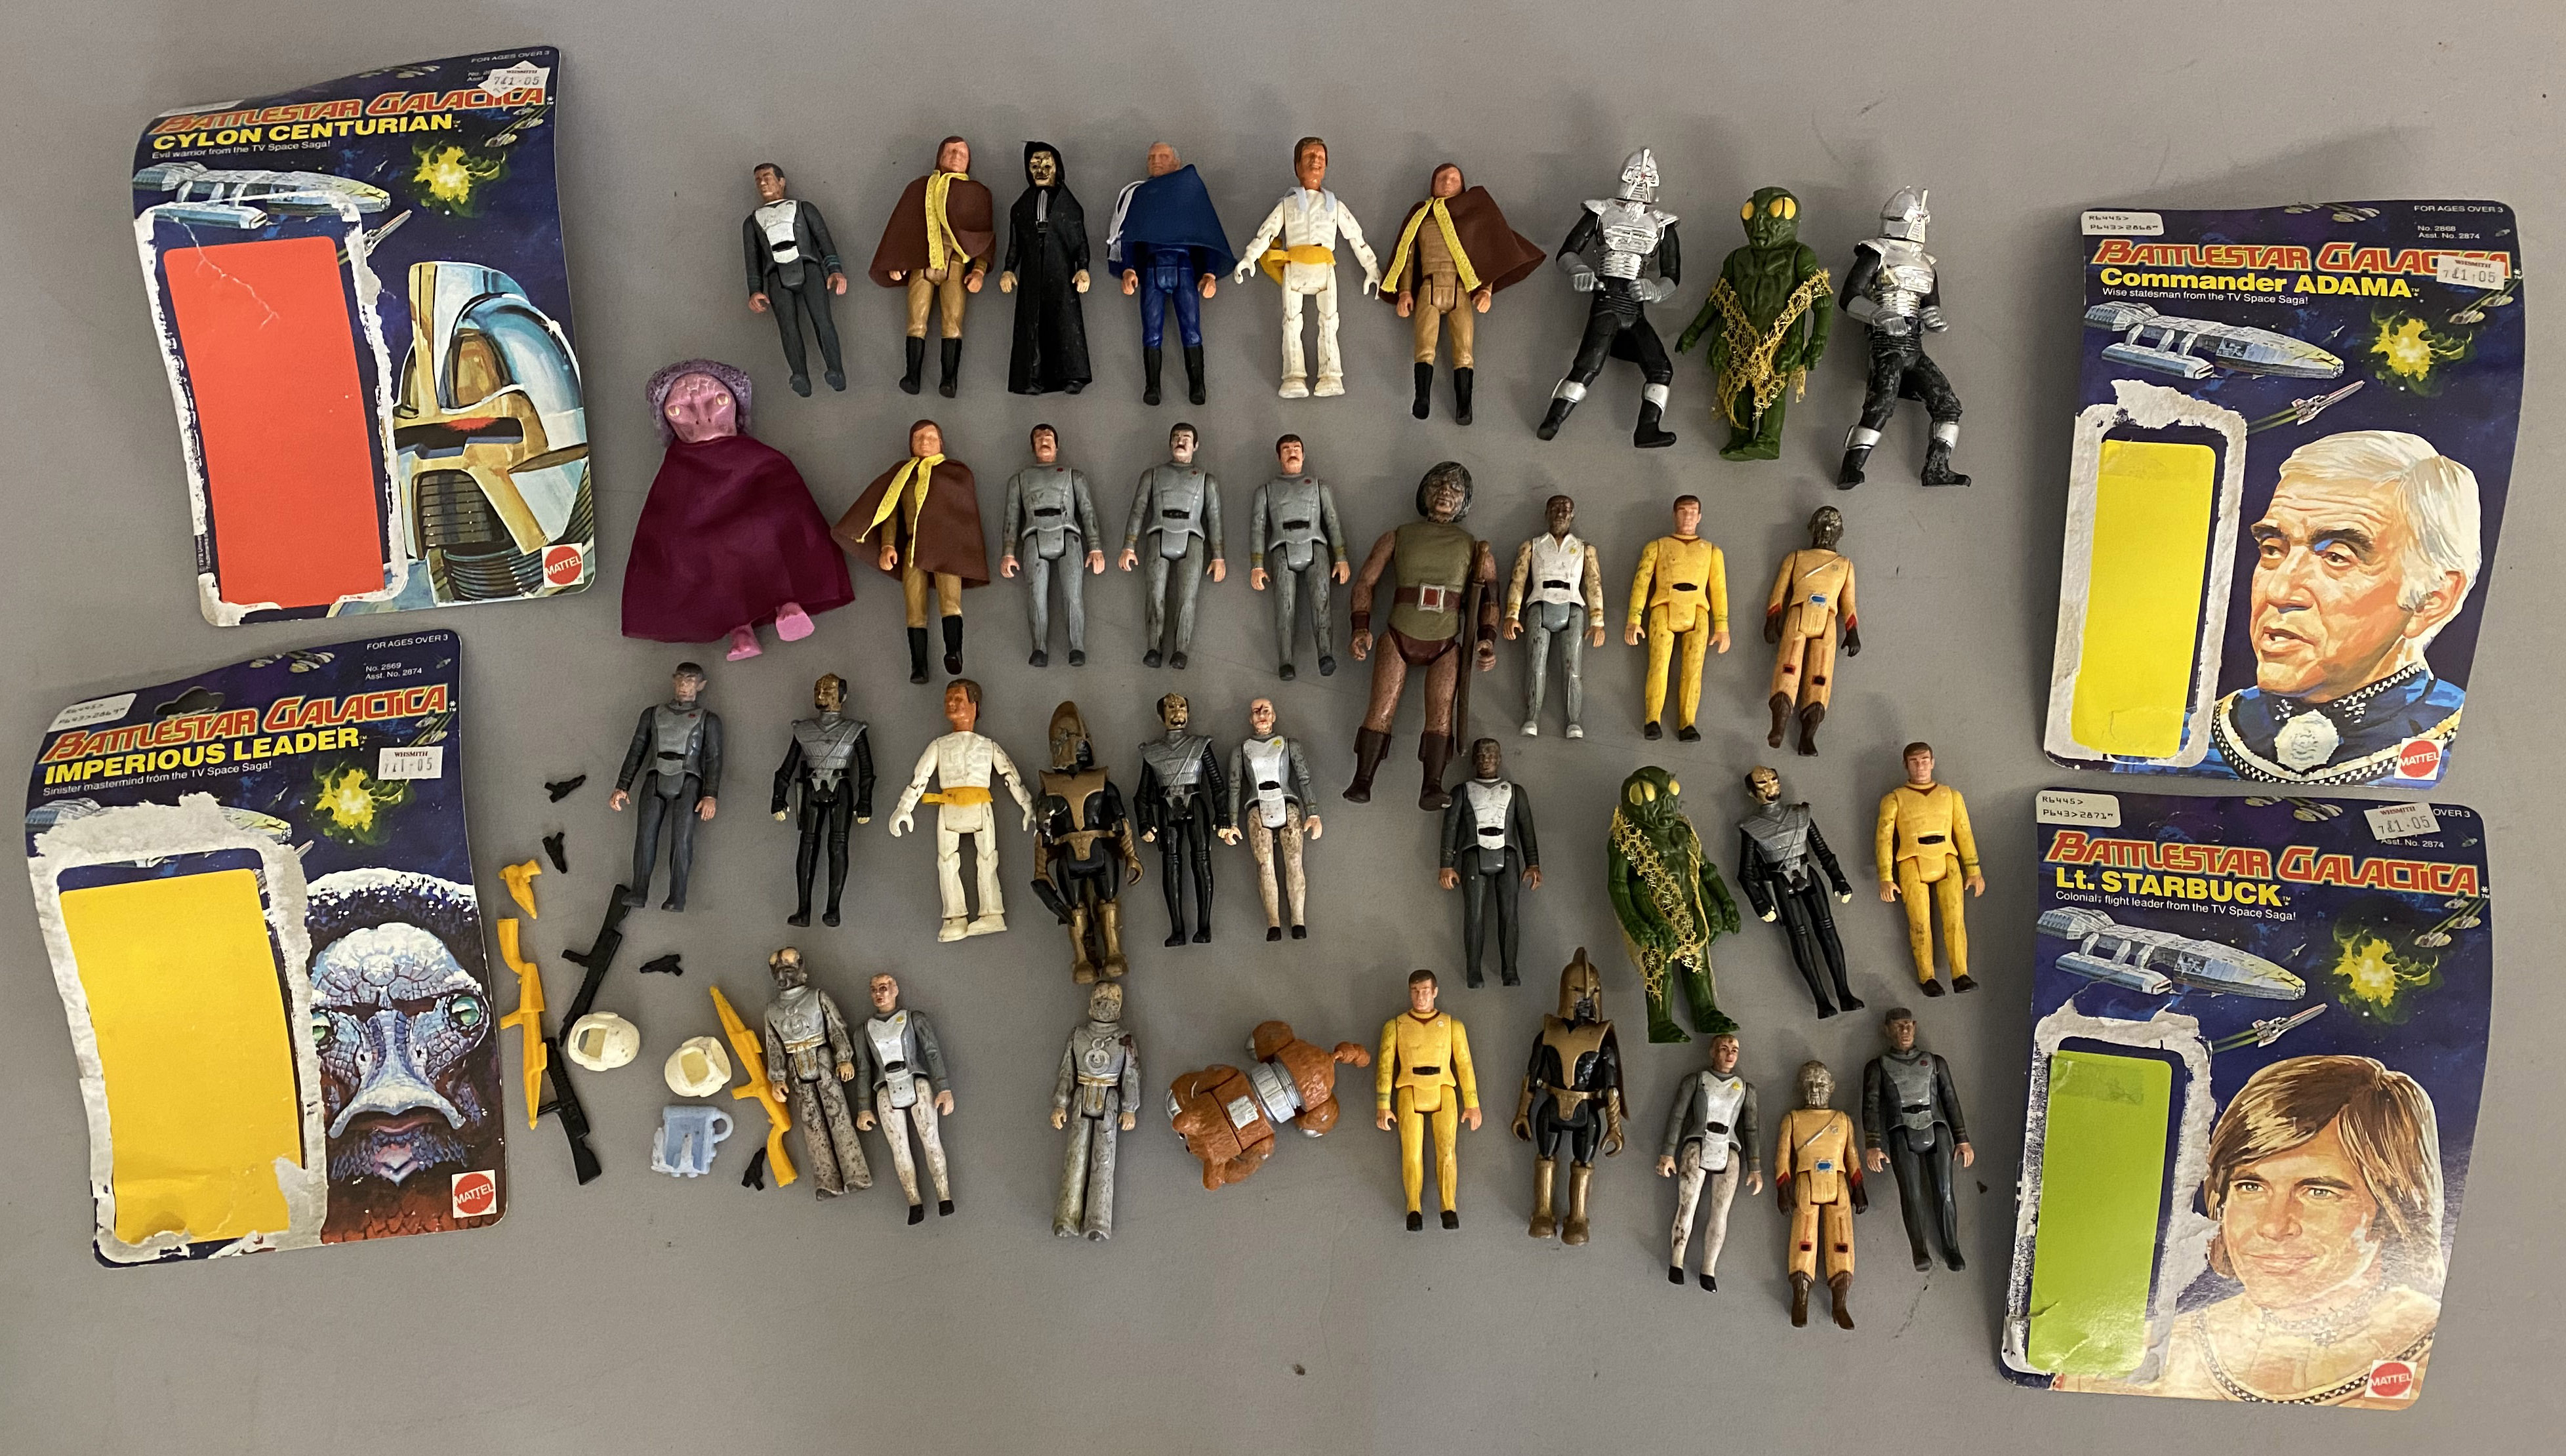 37 vintage assorted sci-fi action figures, mostly appear to be from the Mattel Battlestar Galactica